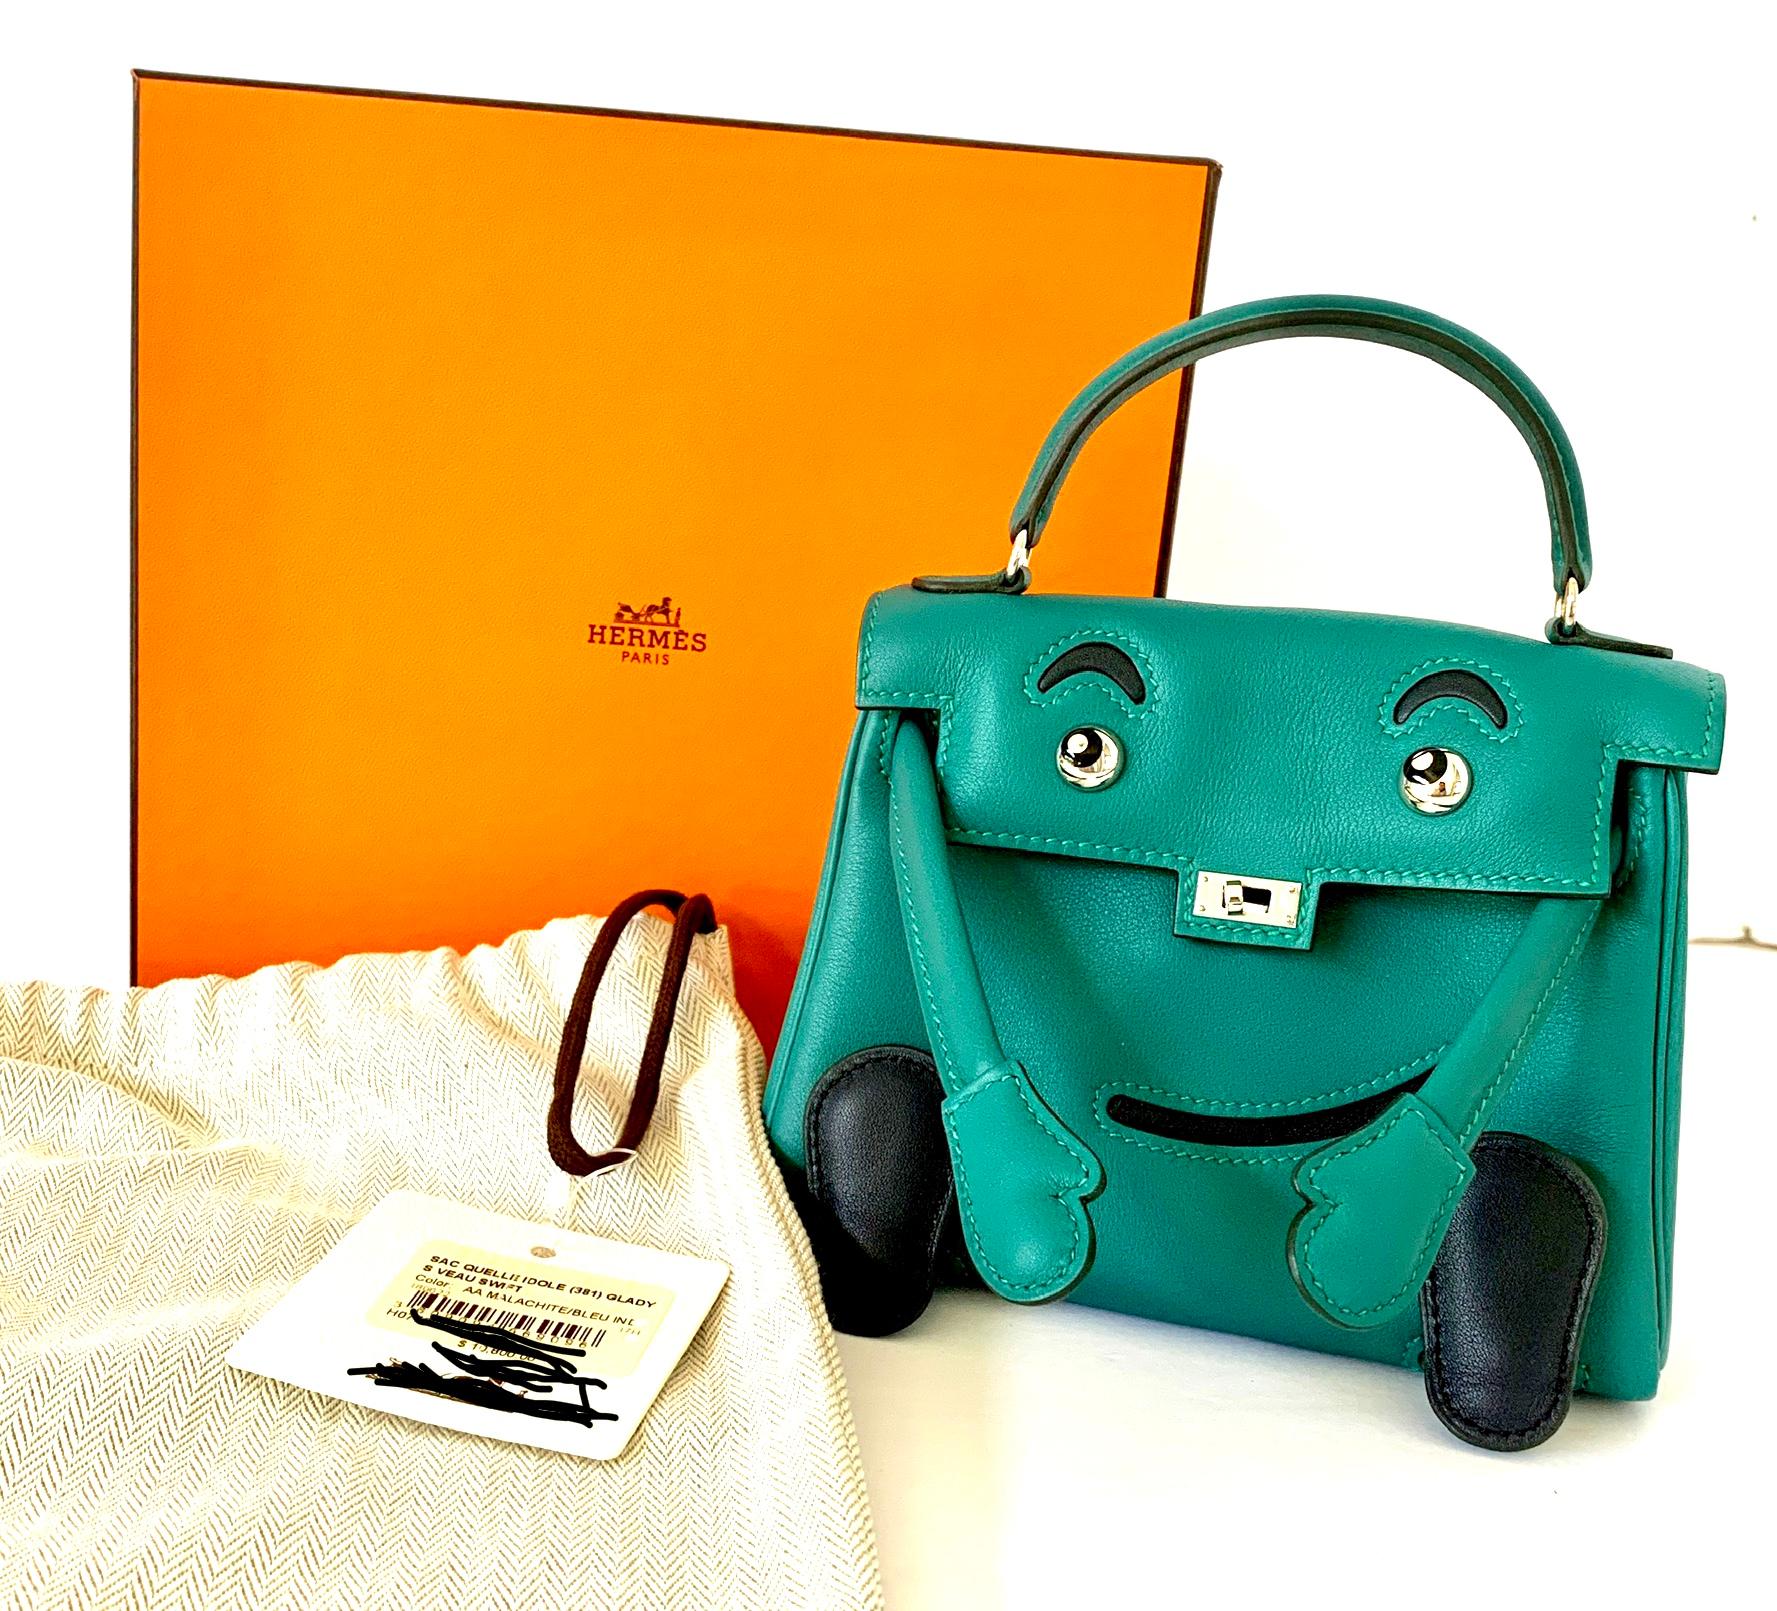 Guaranteed authentic limited edition 
One of the Rarest Hermes Bag in the World

The Quelle Idole Kelly Doll Bag

Malachite

C Stamp

Original receipt included

Hermes Limited Edition Swift Leather Quelle Idole Kelly Doll Bag.